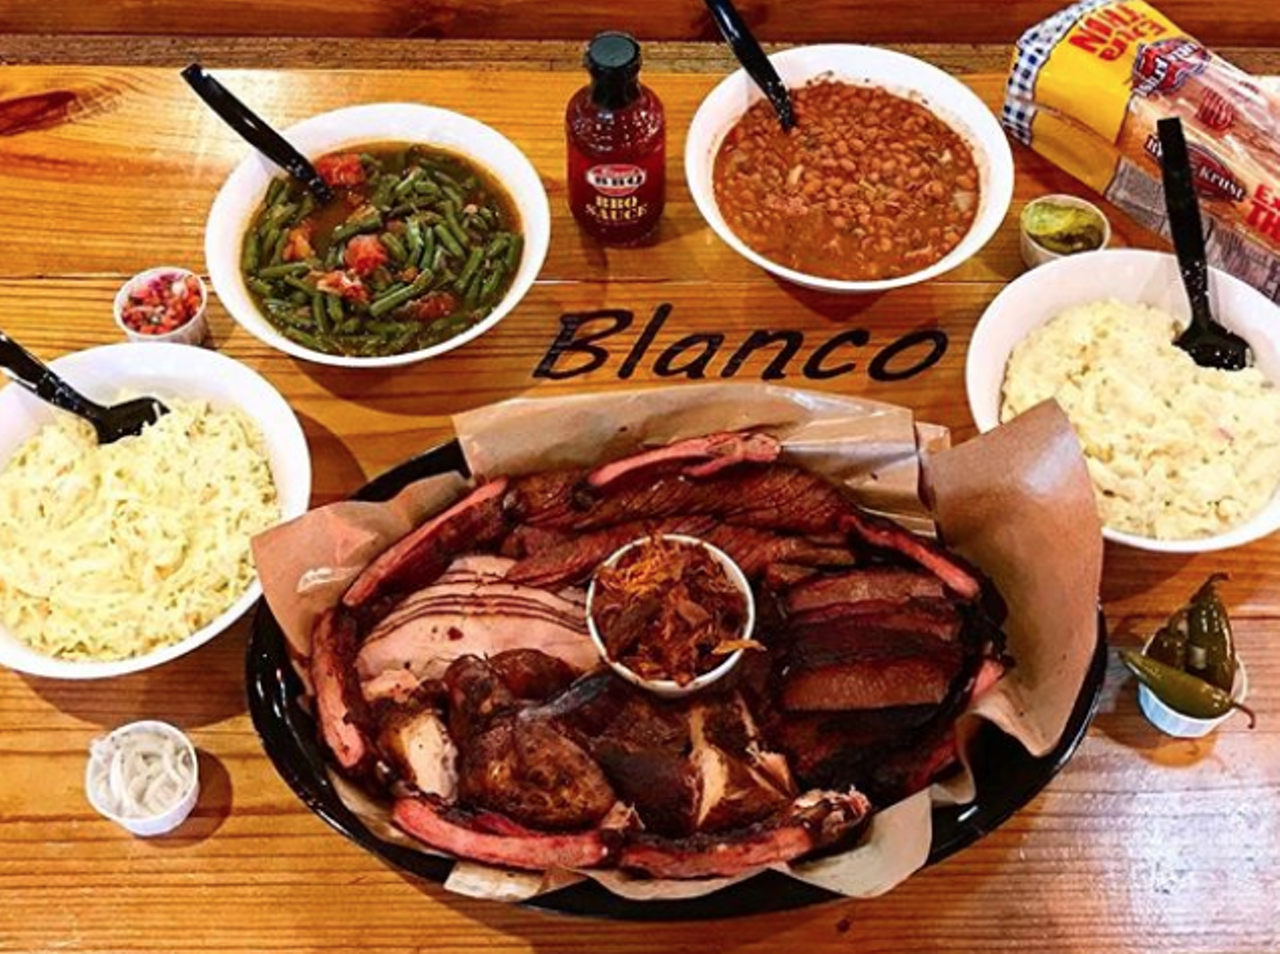 Blanco BBQ
13259 Blanco Road, (210) 251-2602, blancobbq.com
Carnivores with big appetites will want to head to Blanco BBQ, known for its hearty portions of smoked meats and classic sides. Served as either a plate or in a sandwich, the barbecue outpost serves brisket, ham, sausage, pulled prok, chicken fried steak and catfish if you’re in the mood. There’s even a drive-thru if you’re trying to indulge in some ‘cue at home or work.
Photo via Instagram / sanantoniomunchies